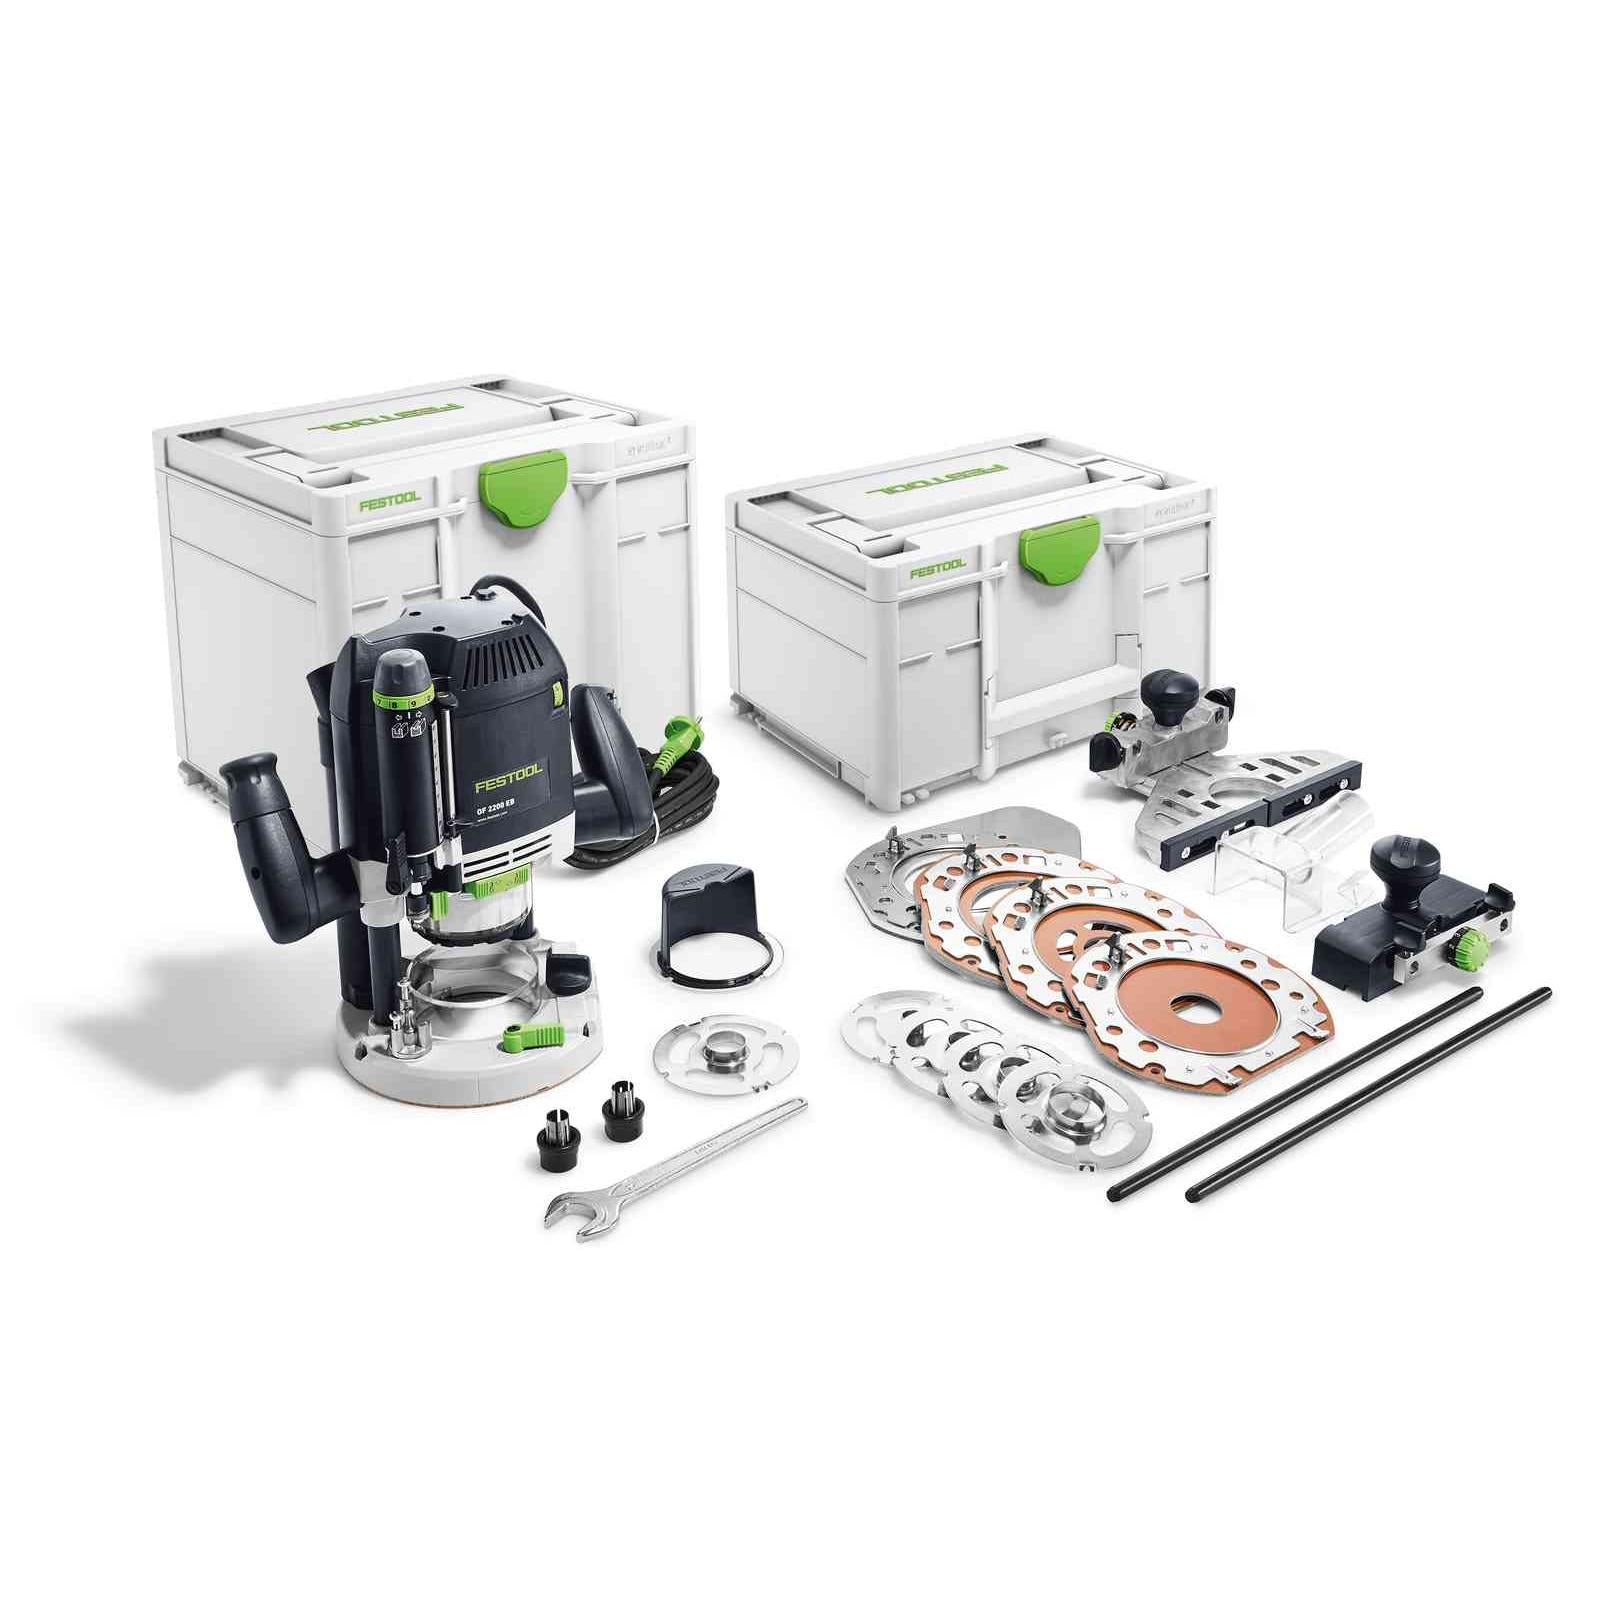 Festool Router OF 2200 EB-Set 576220 Power Tool Services